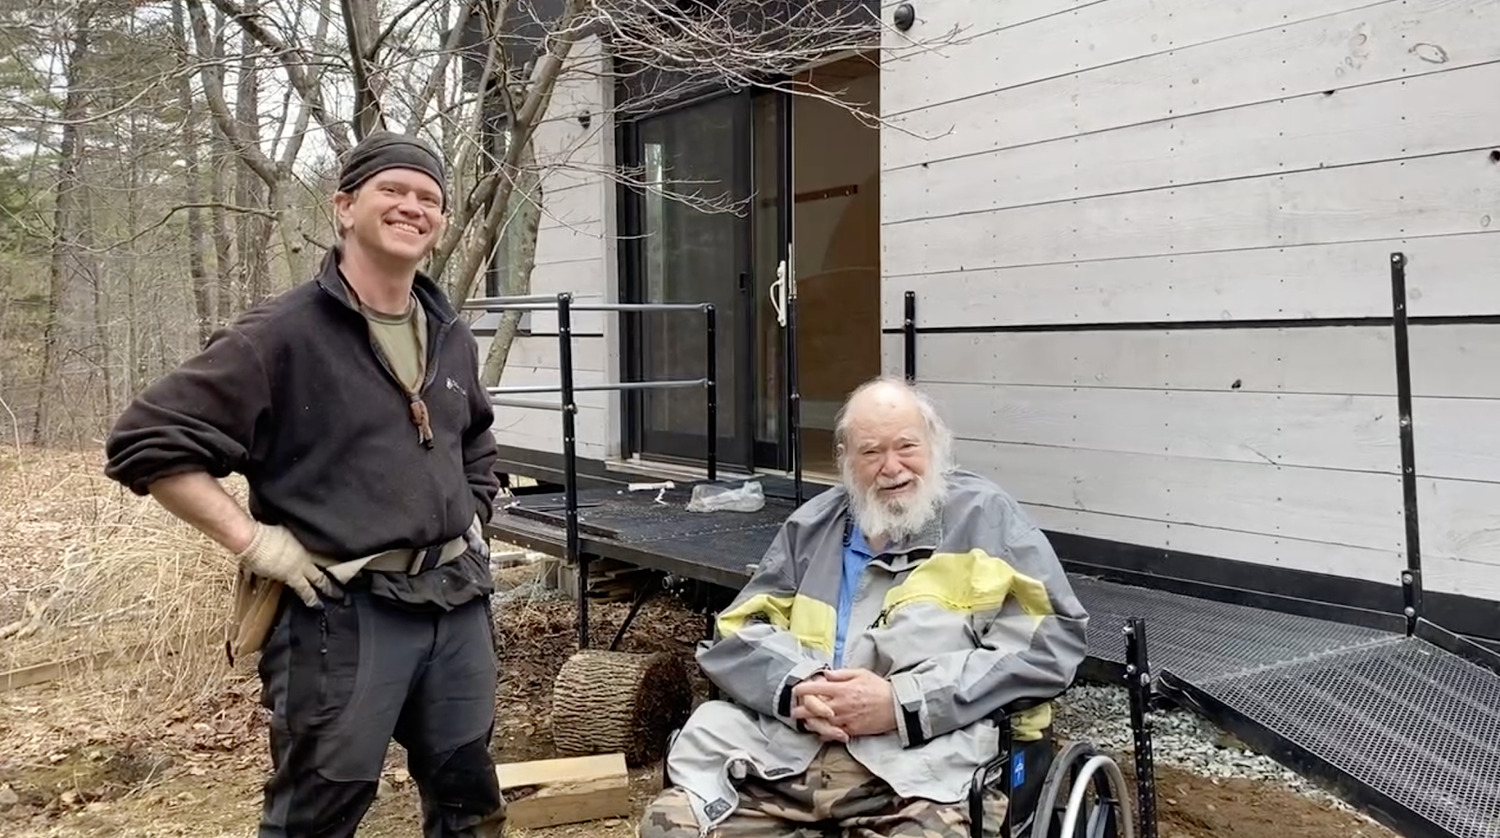 Bob Everingham and his father, John Everingham, in front of the newly delivered Wheel Pad! Brattleboro, VT